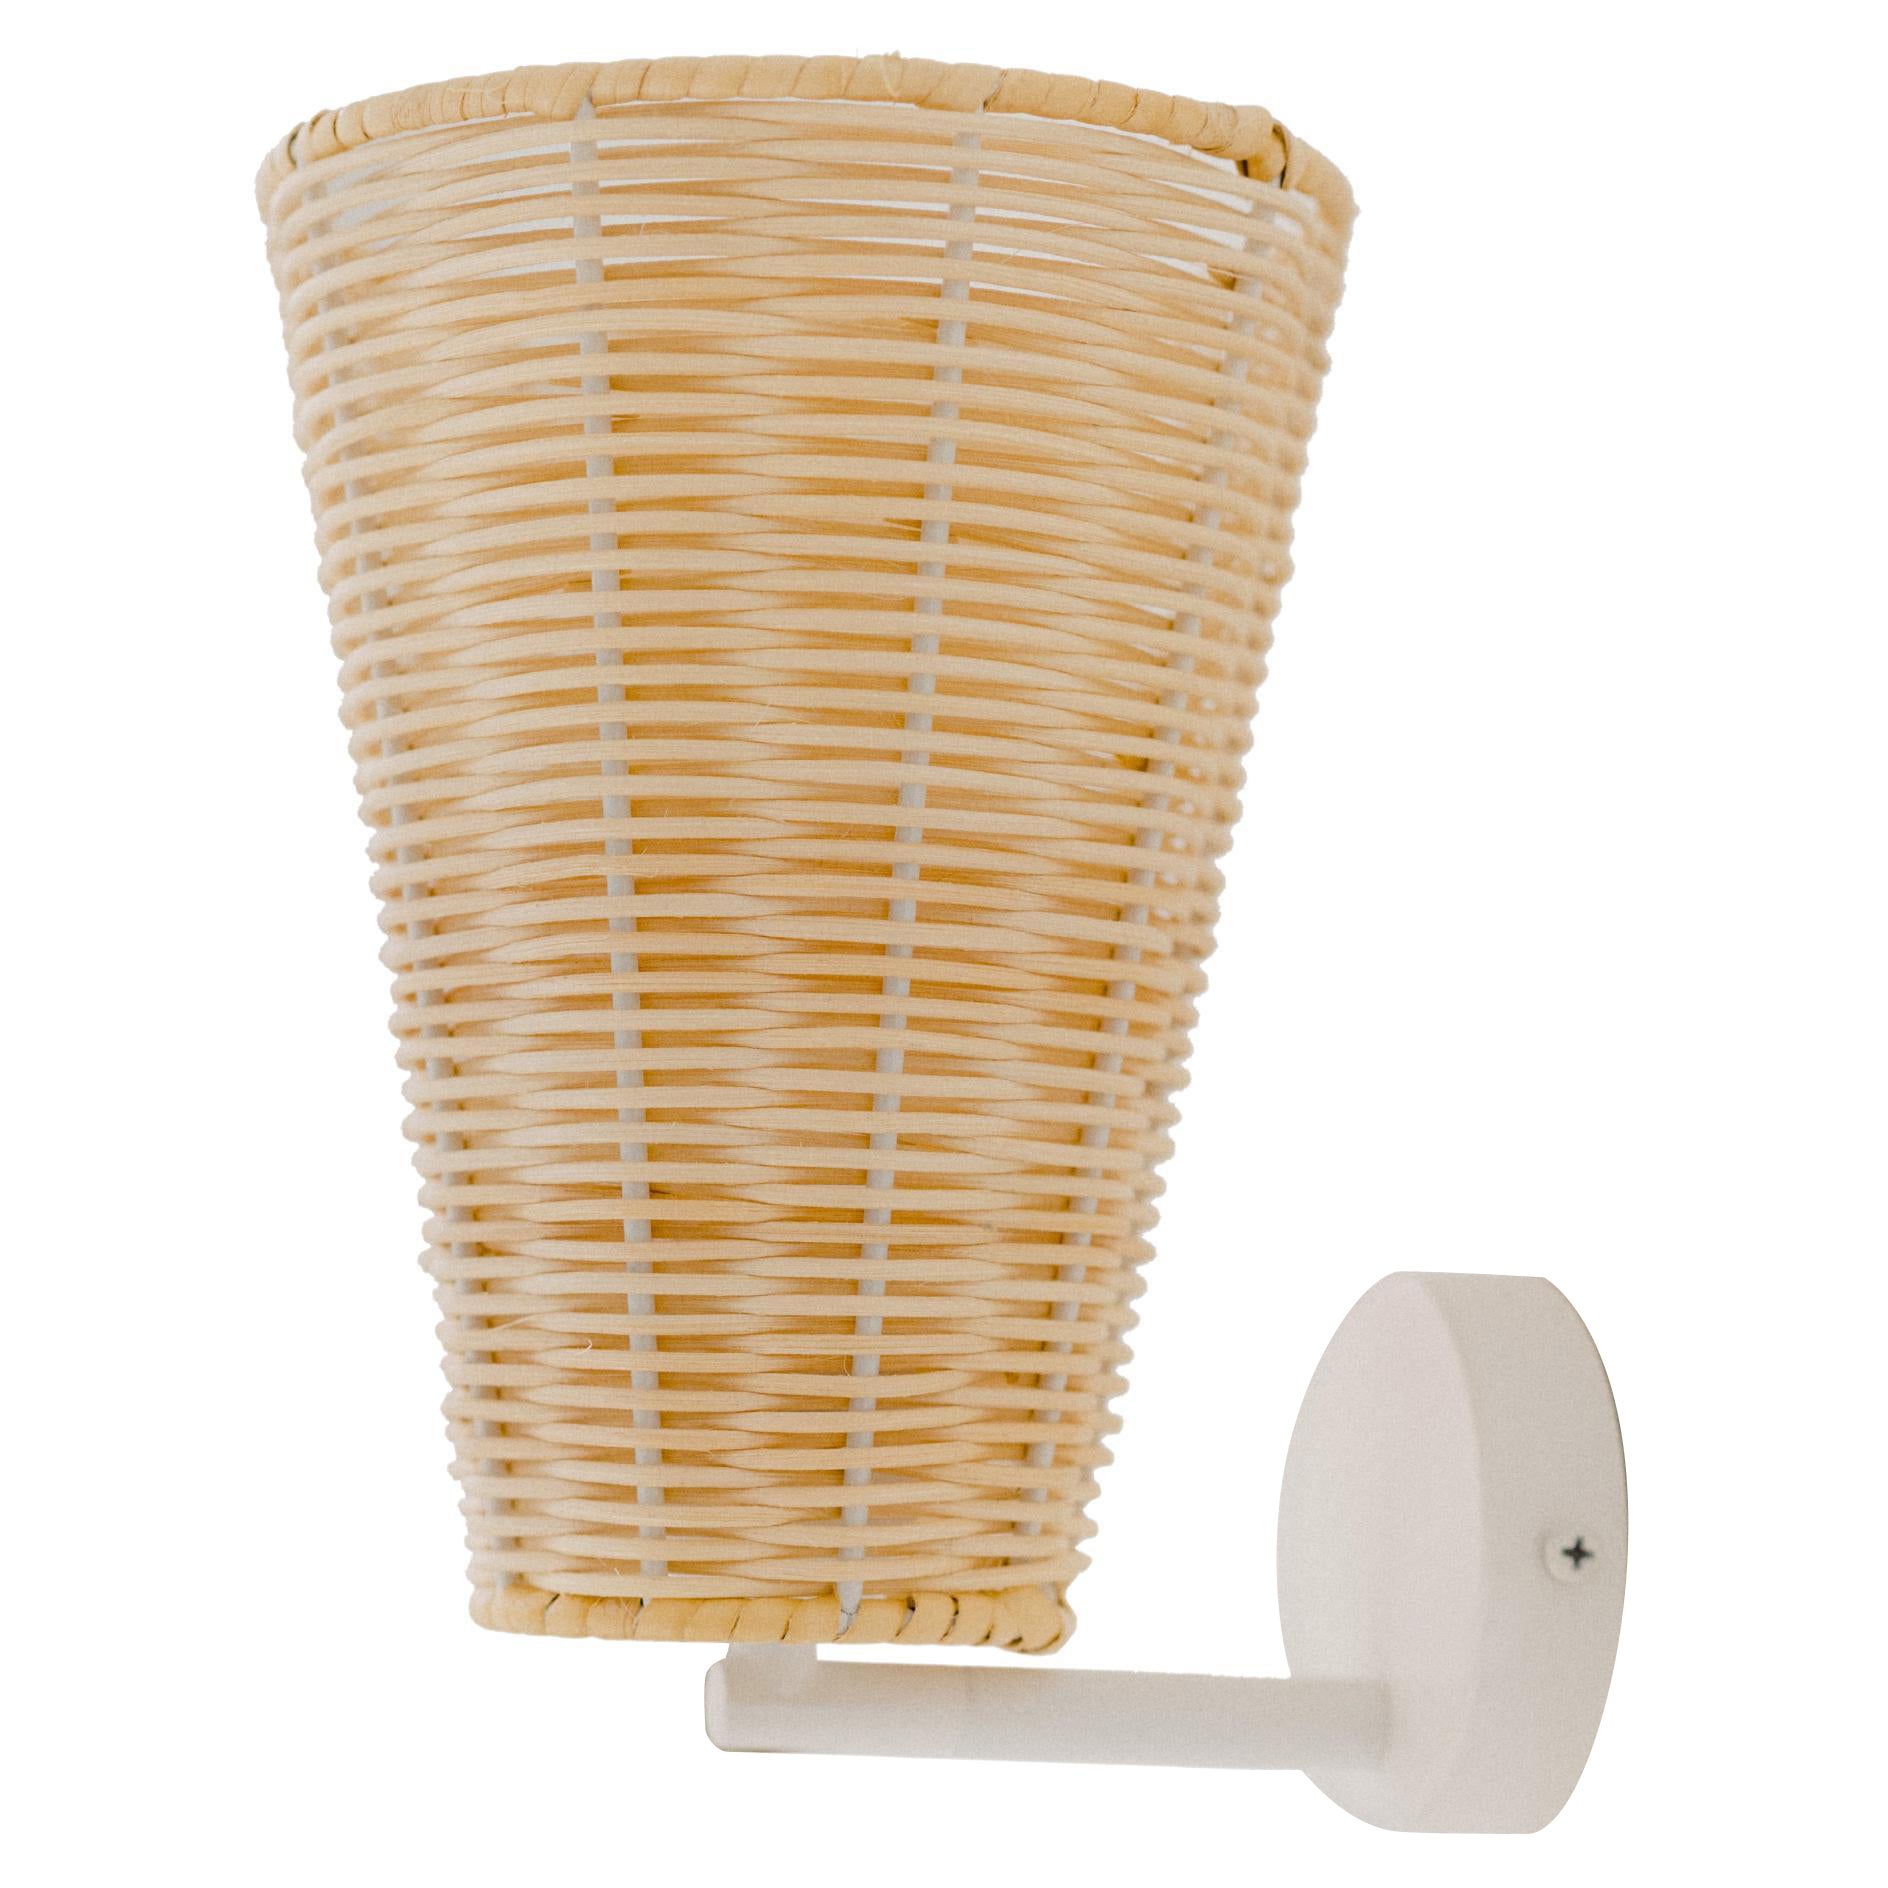 Ands for Objects fors Contemporary, Handmade, Wall Lamp Sconce, Rattan Cone, by Mediterranean Objects